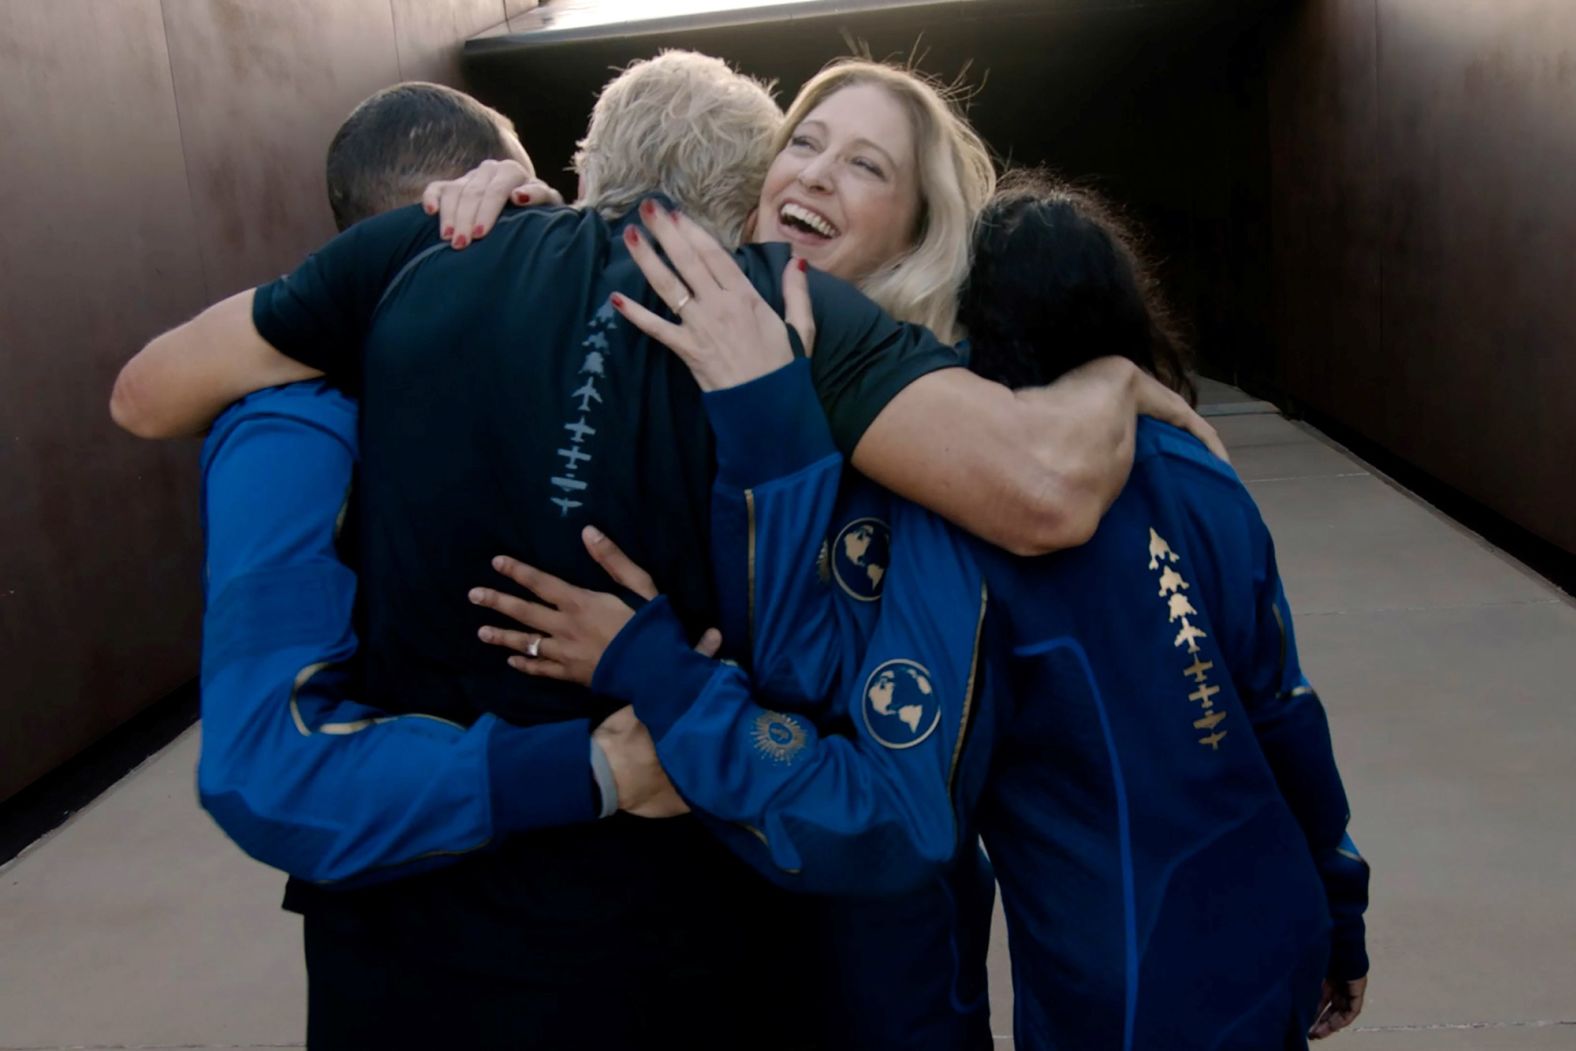 Virgin Galactic's chief astronaut instructor Beth Moses embraces Branson and other crew members ahead of the spaceflight.